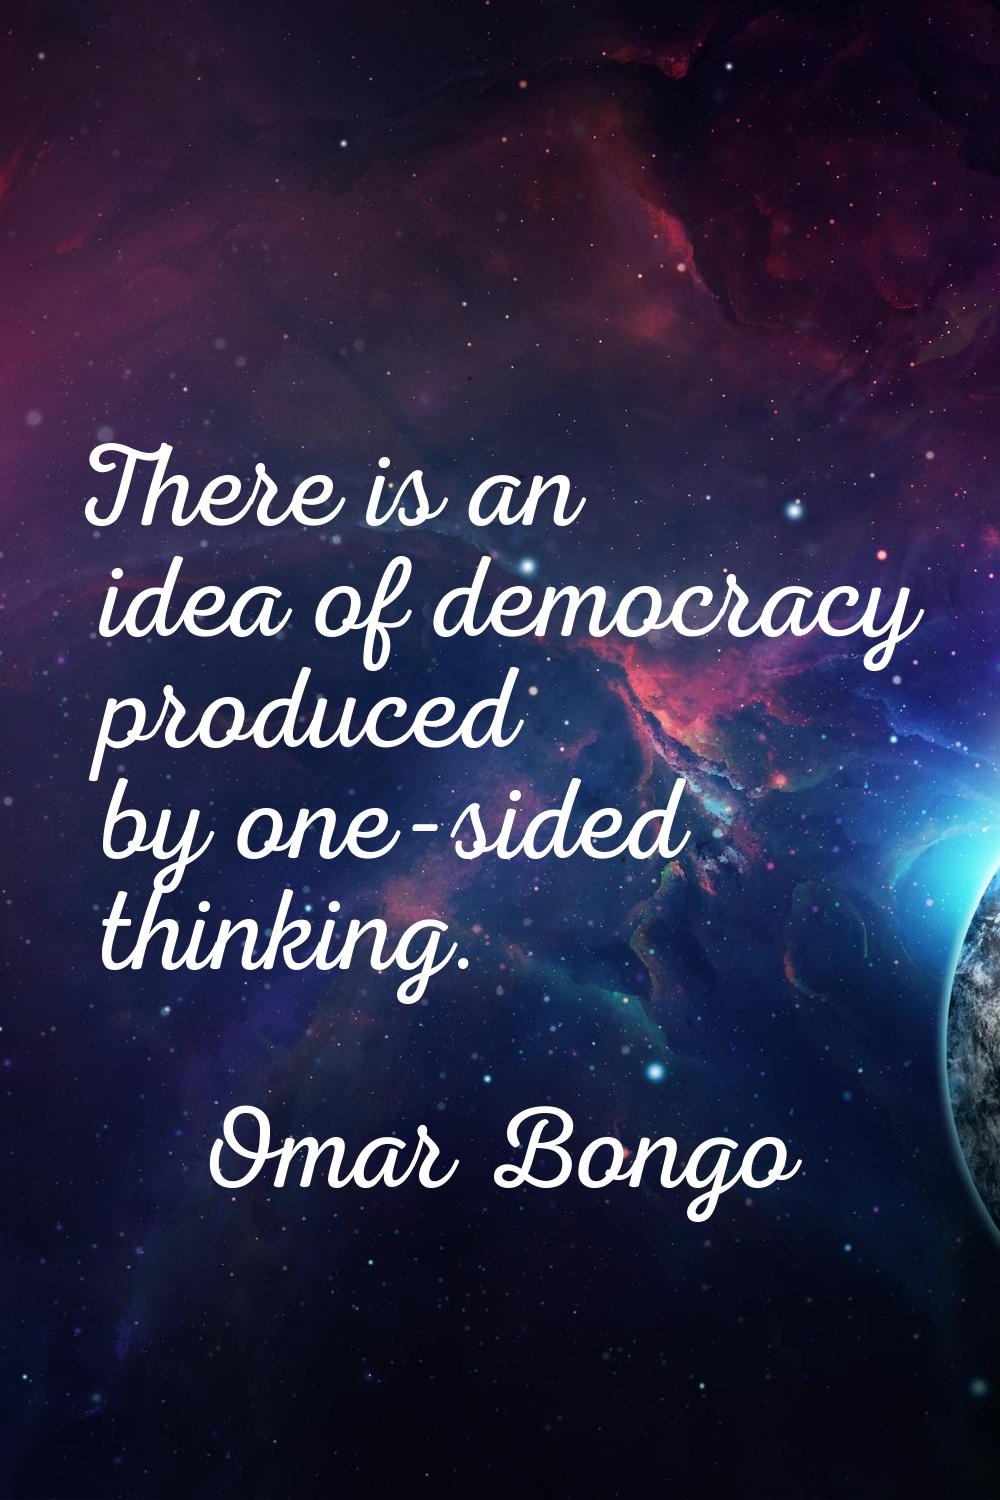 There is an idea of democracy produced by one-sided thinking.